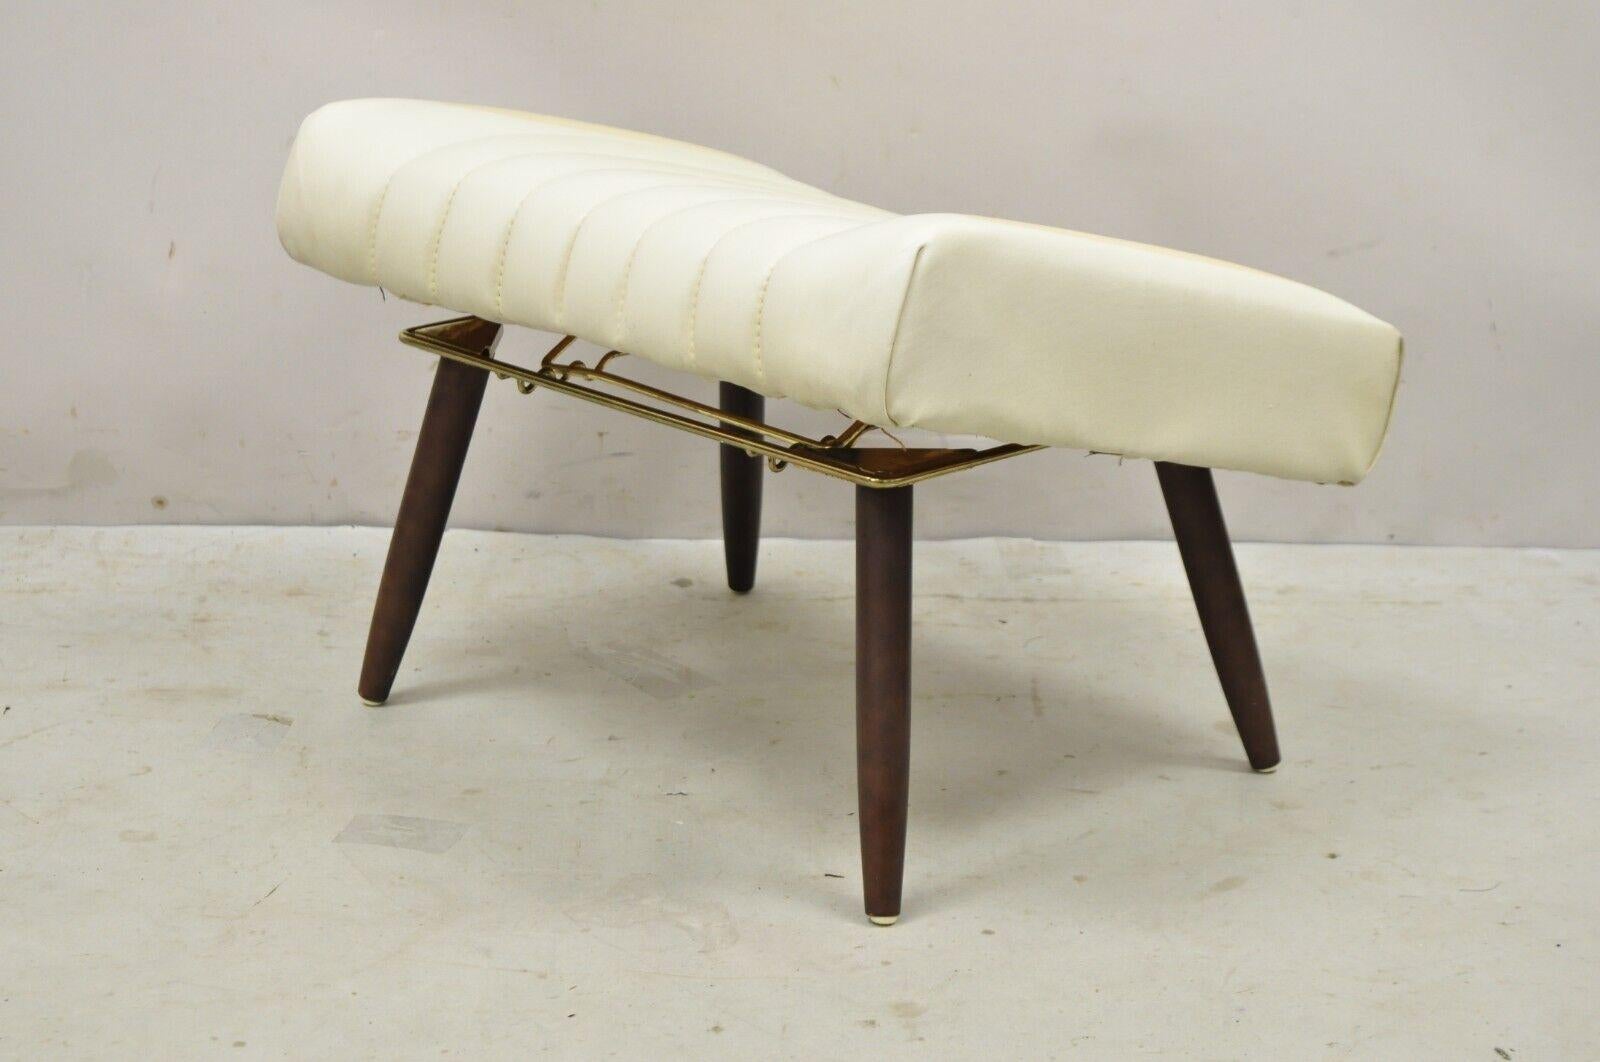 Vintage Mid-Century Modern Adjustable Angle Ottoman Footstool with Wooden Legs For Sale 3